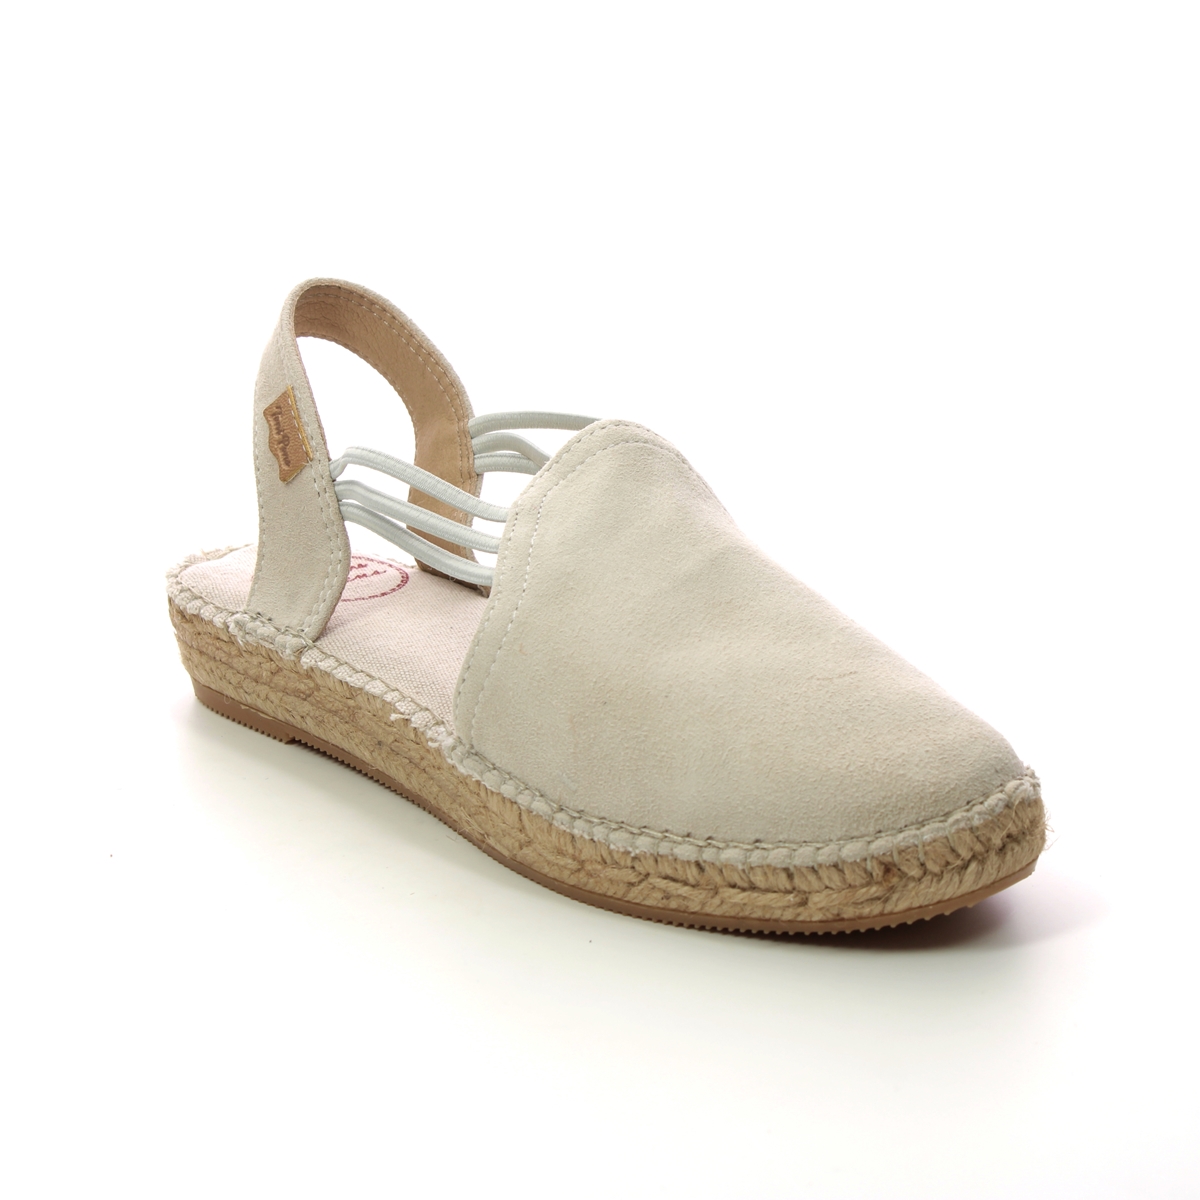 Toni Pons Nuria Stone Womens Espadrilles 0110-53 in a Plain Leather in Size 41